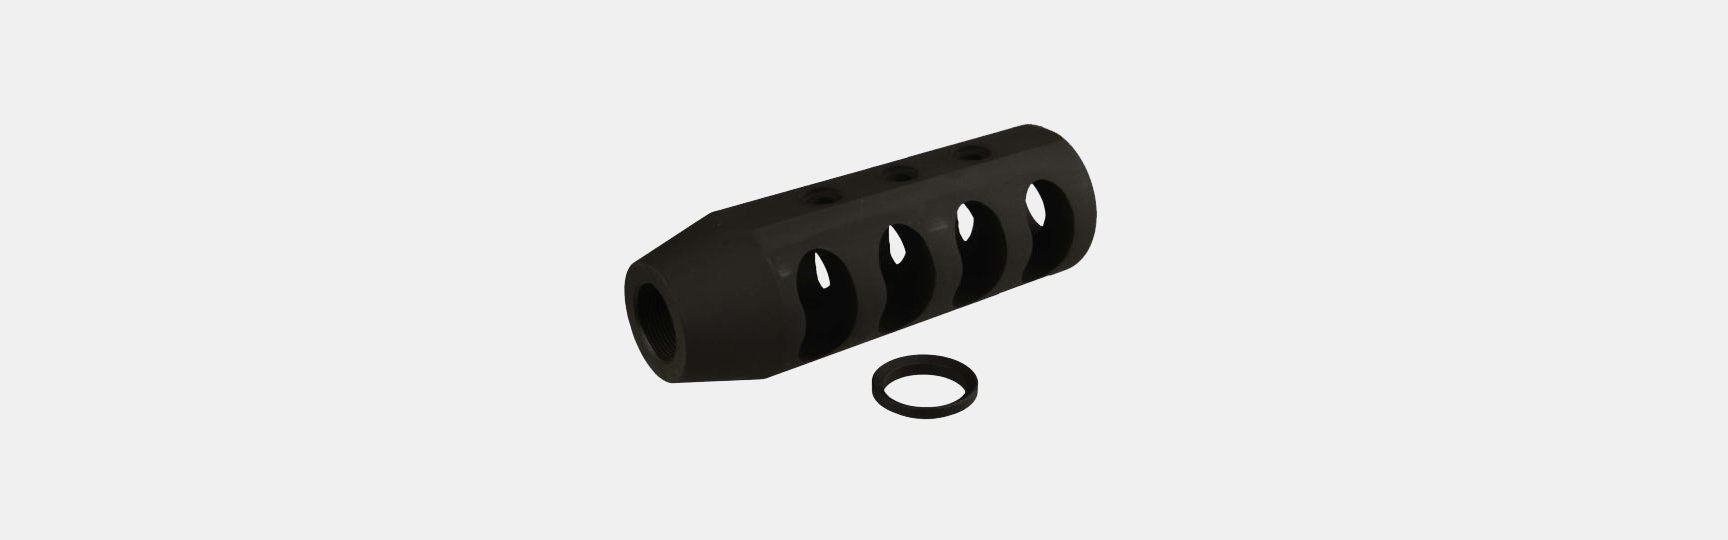 Should you add a Muzzle Brake to your gun?